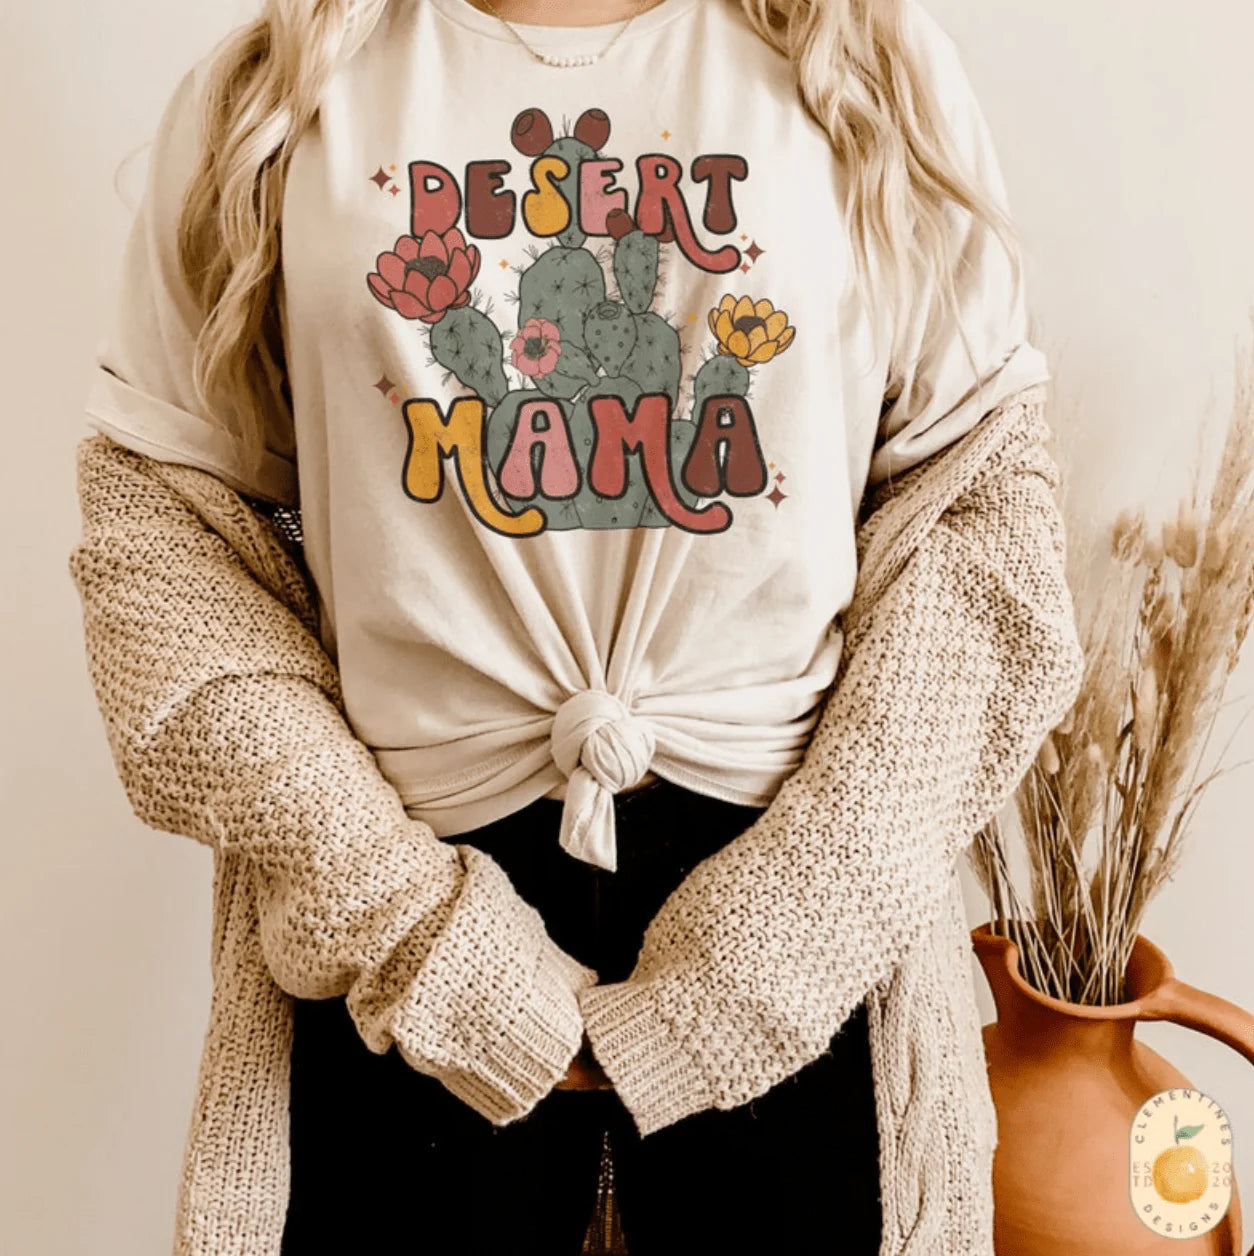 A cream colored short sleeve crew neck tee featuring a graphic of a cactus with pink and orange flowers and the text "desert mama" in coordinating colors with the flowers. Item is pictured on a plain white background